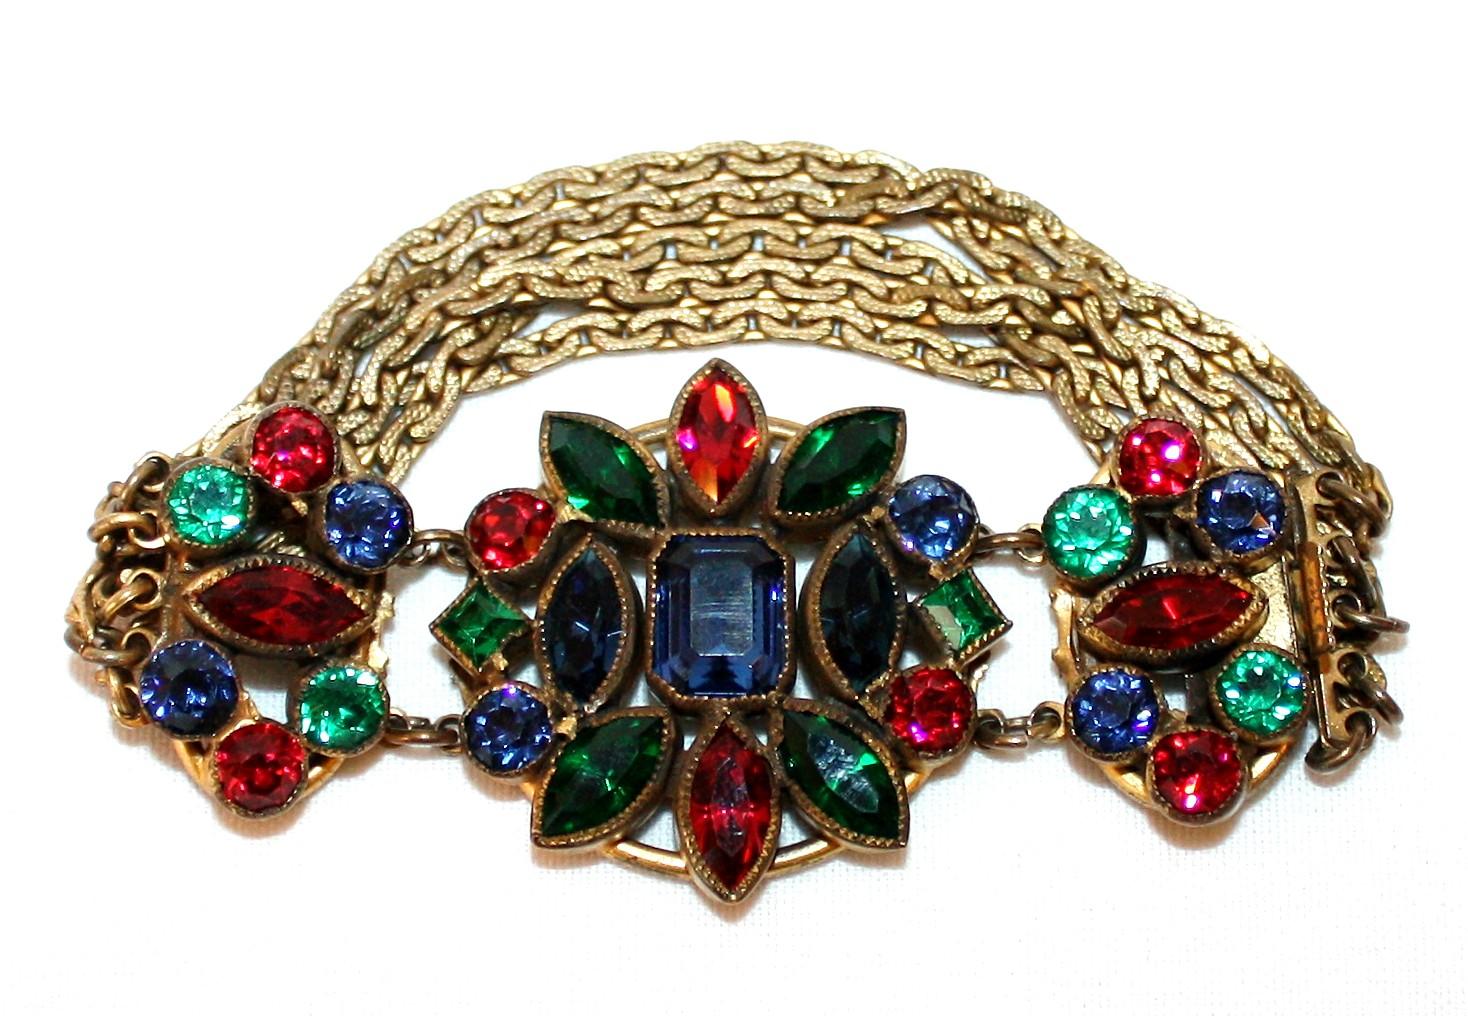 Circa 1930s Czech brass and gold tone metal multi chain bracelet.  The top is bezel set with multi-shaped and faceted jewel tone Bohemian glass stones.  The side closure is firm and secure and the condition is very good with minimal wear.  Unmarked.